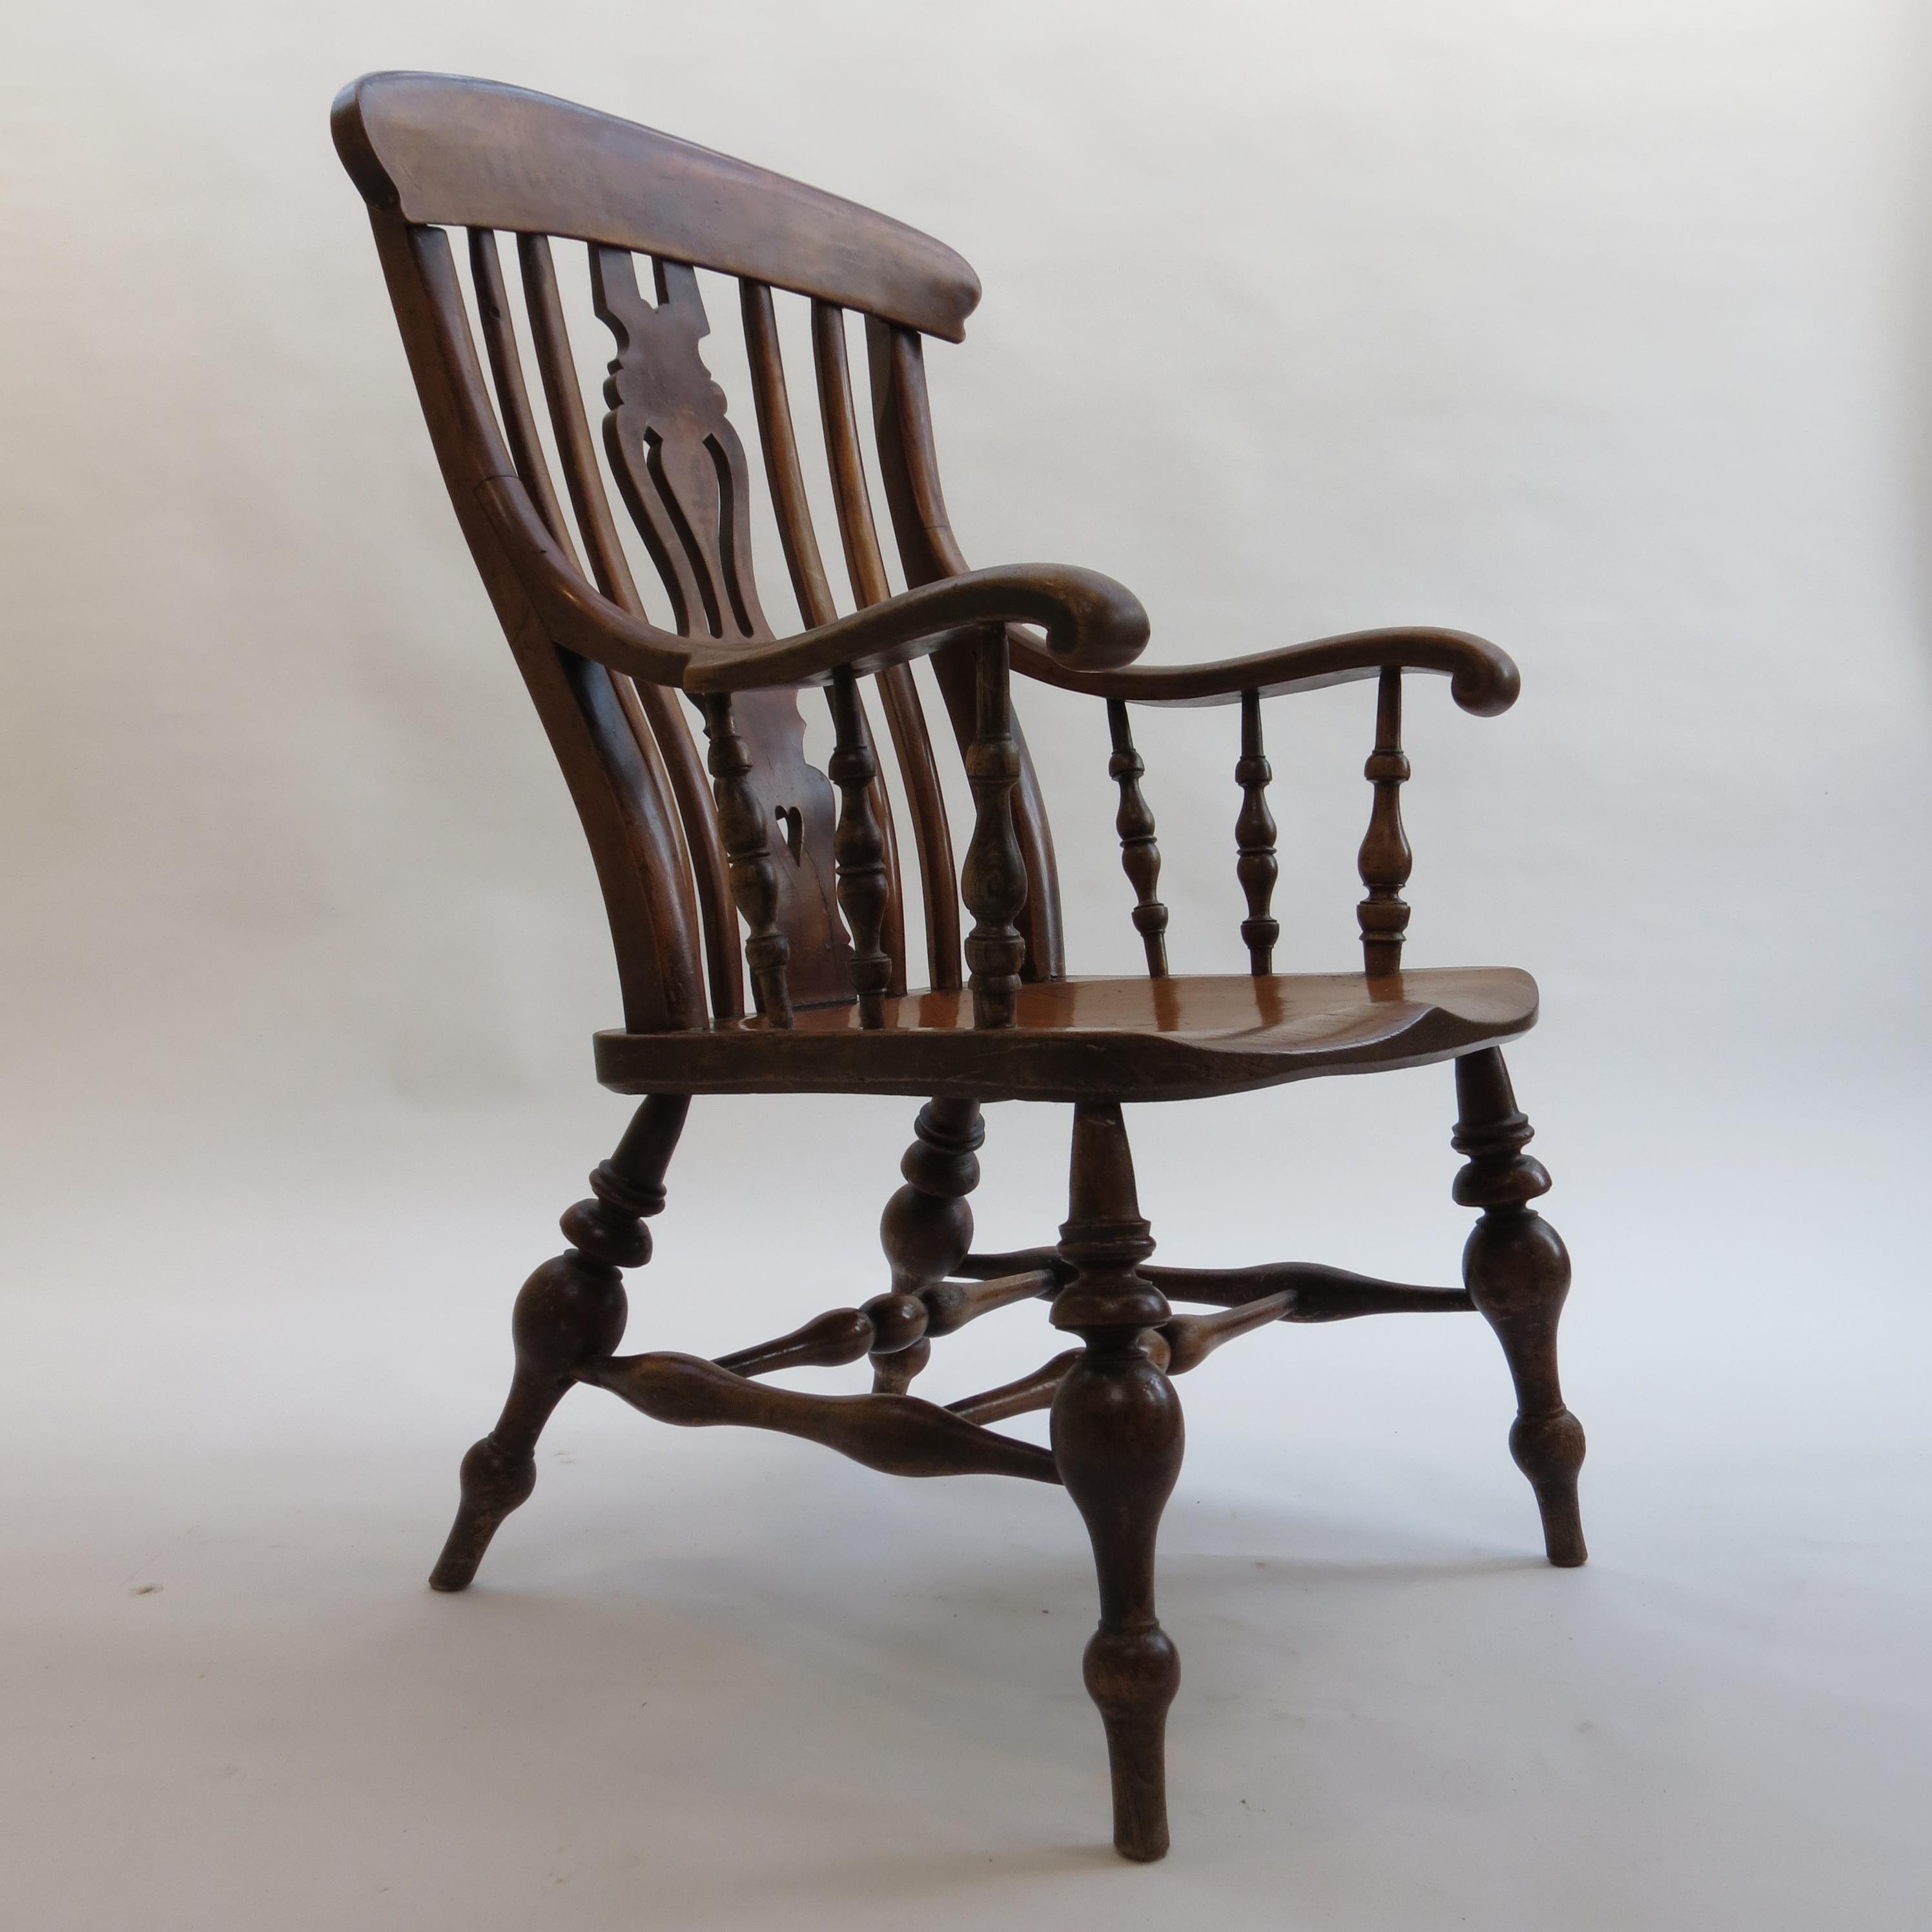 Hand-Crafted Antique Extra Large Ash and Sycamore English Windsor Country Chair 19th Century 